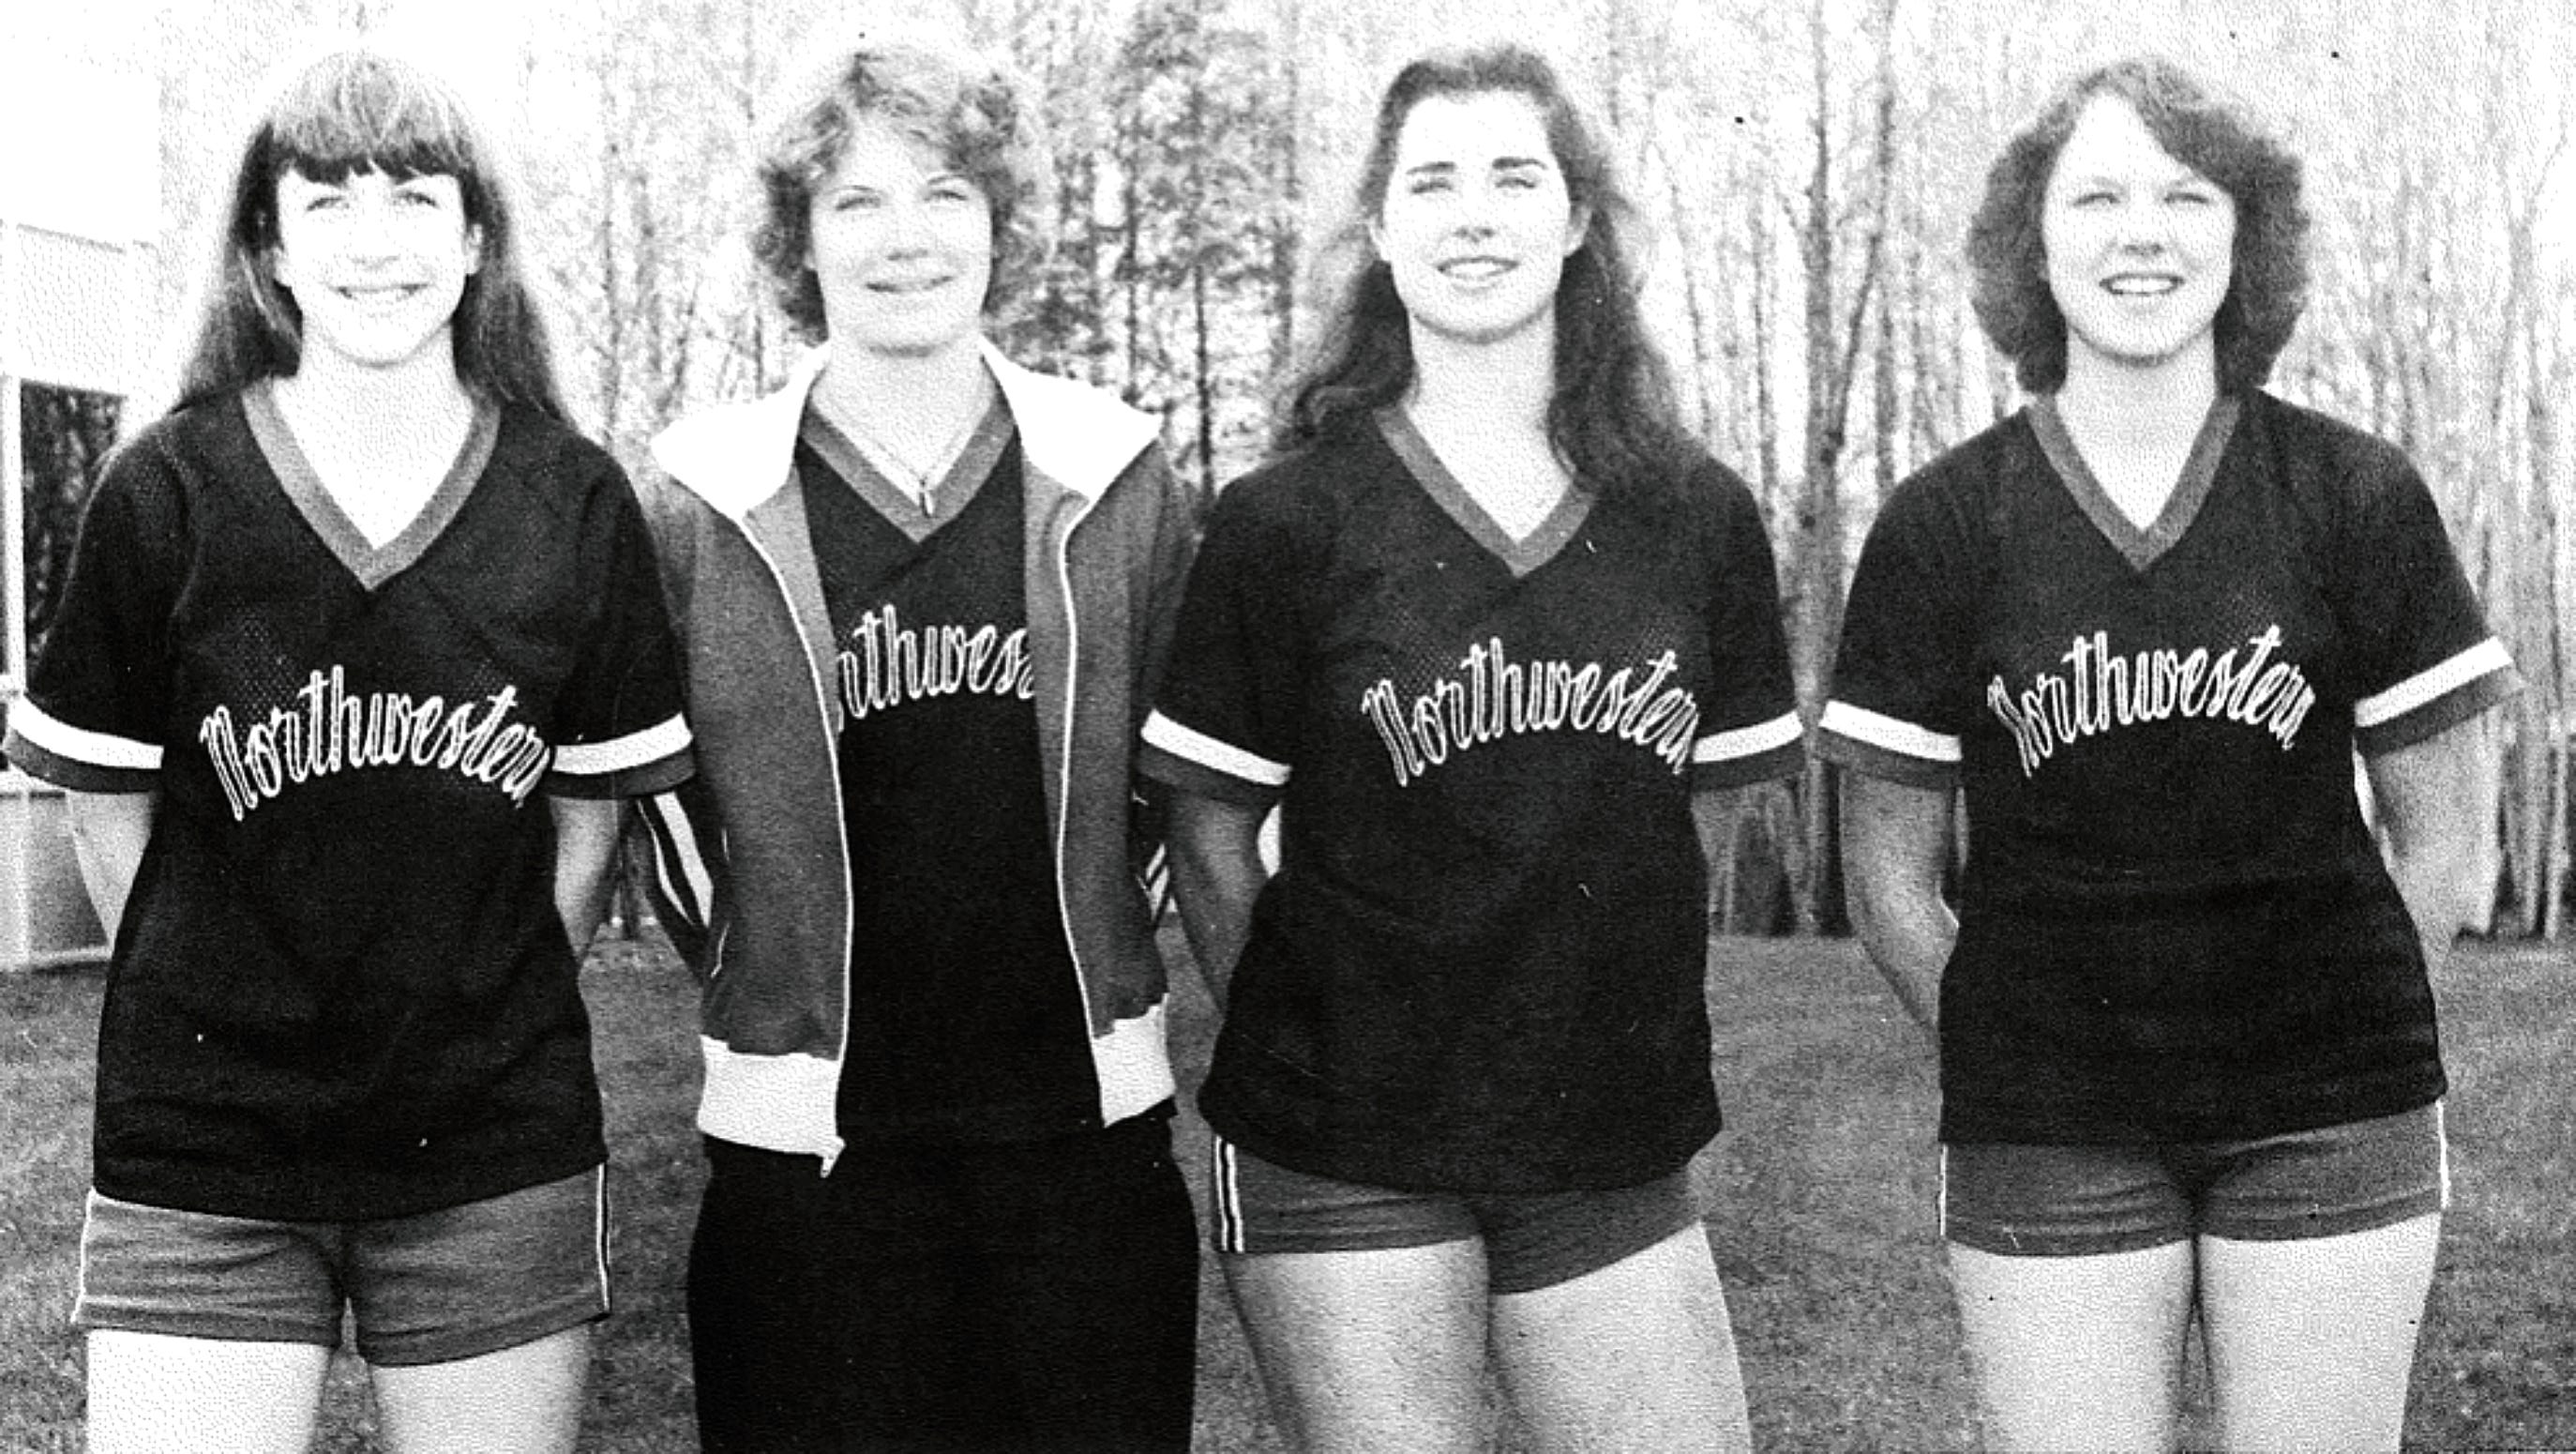 Coach Sue Fargo, second from left, is pictured with student-athletes, from left to right, Terry Bartko, Sally Andrews and Pam Woytek in this 1980 Northwestern yearbook photo.